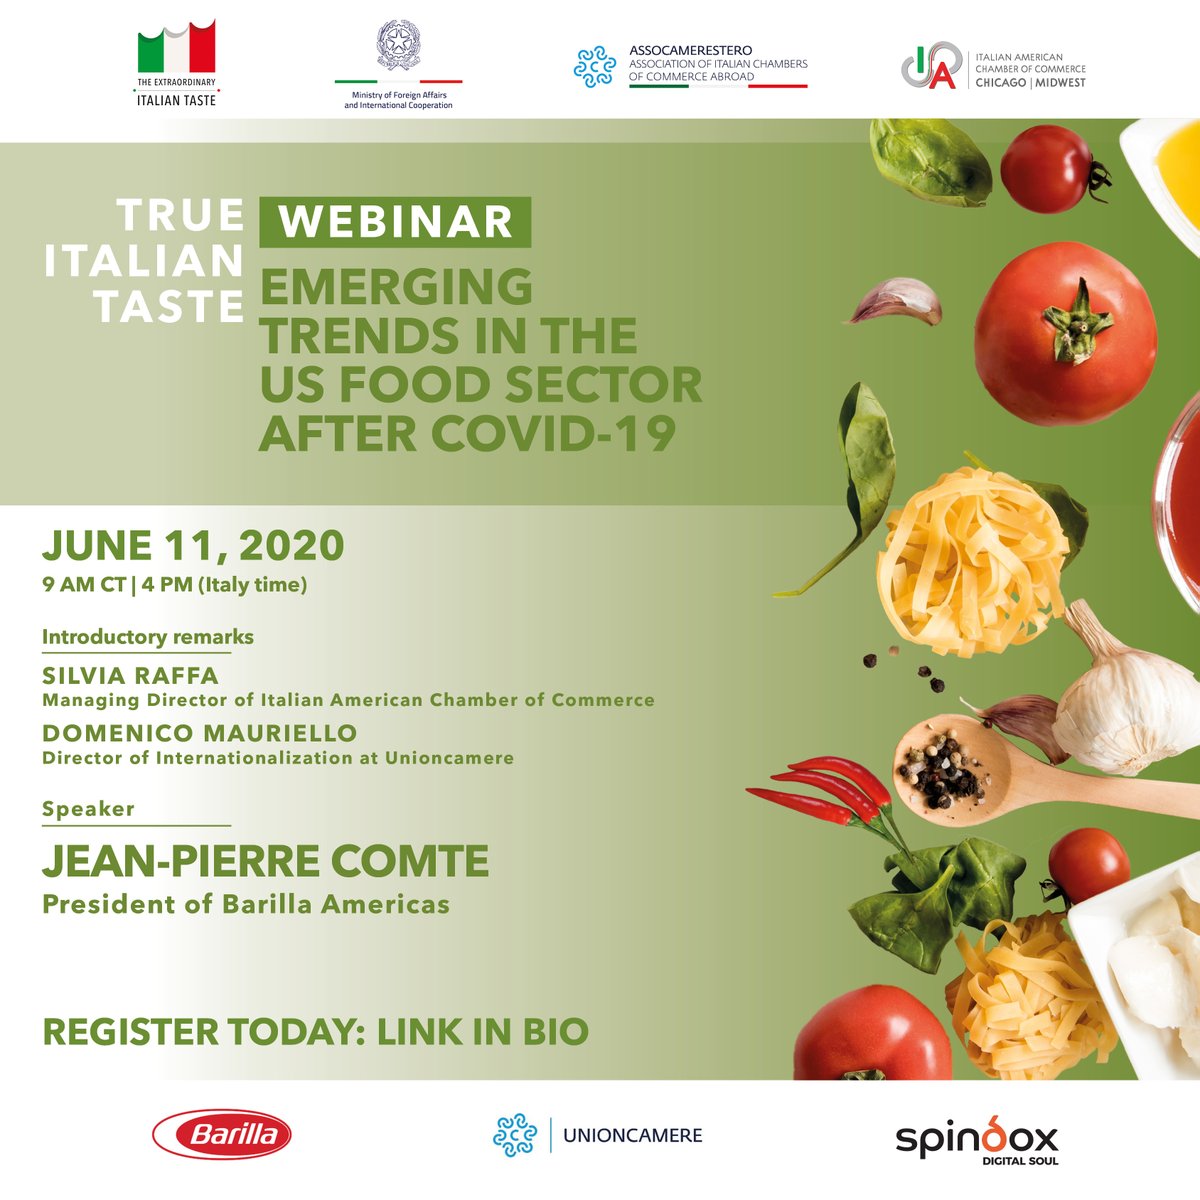 What will happen to the food sector after the Covid-19 pandemic? What are the trends that will influence the production, processing and consumption of food?⚠️ The answer is here: bit.ly/30pp2zy #extraordinaryitaliantaste #Italy #madeinitaly #trueitaliantaste